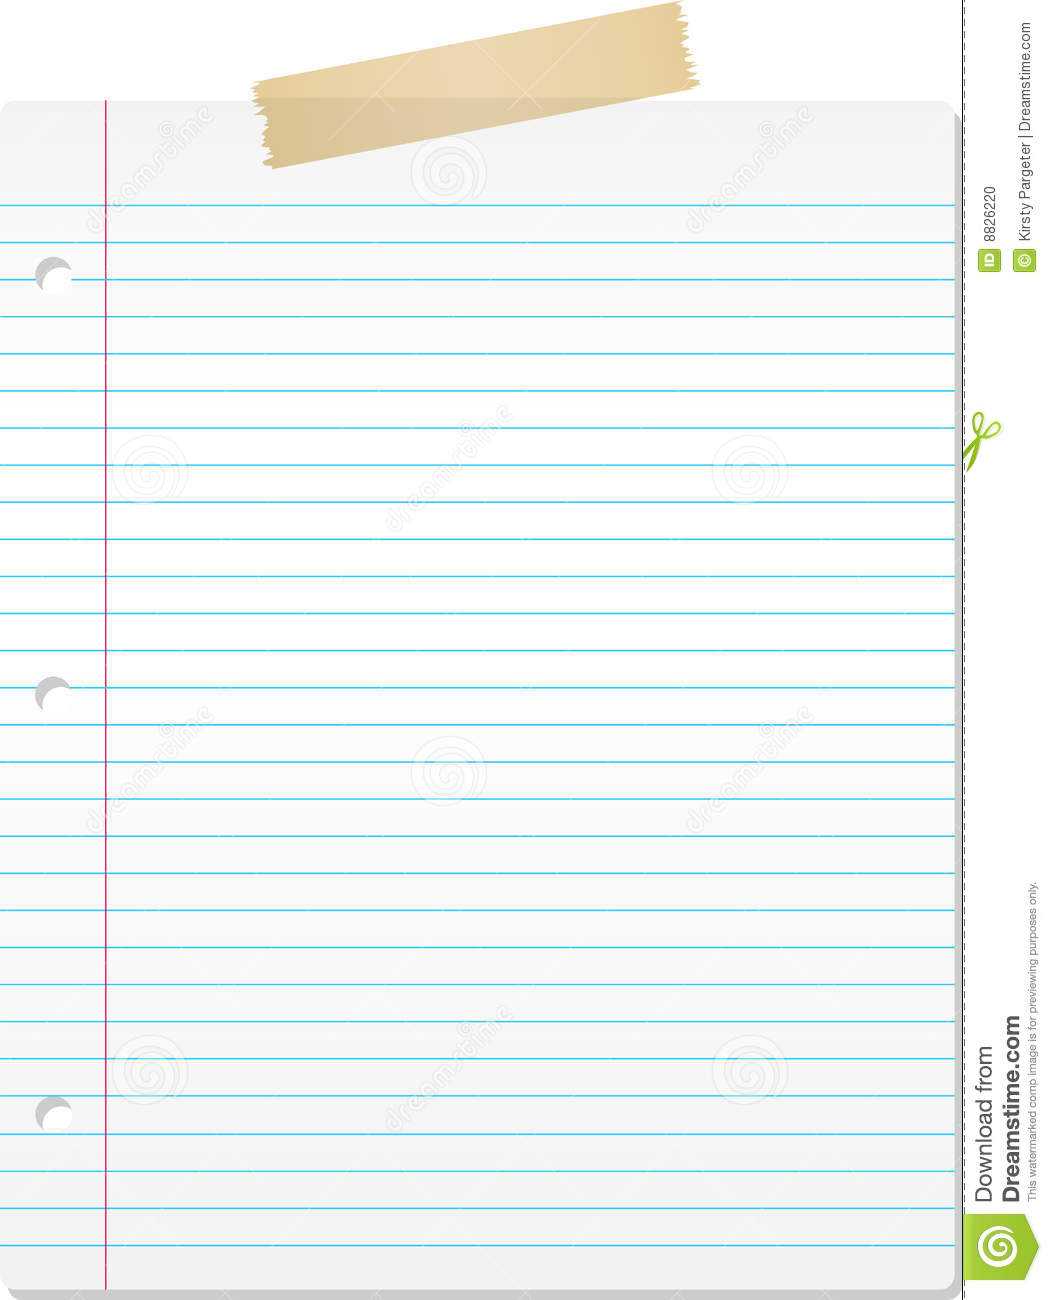 026 Microsoft Word Lined Paper Template Ideas Fantastic In Notebook Paper Template For Word 2010